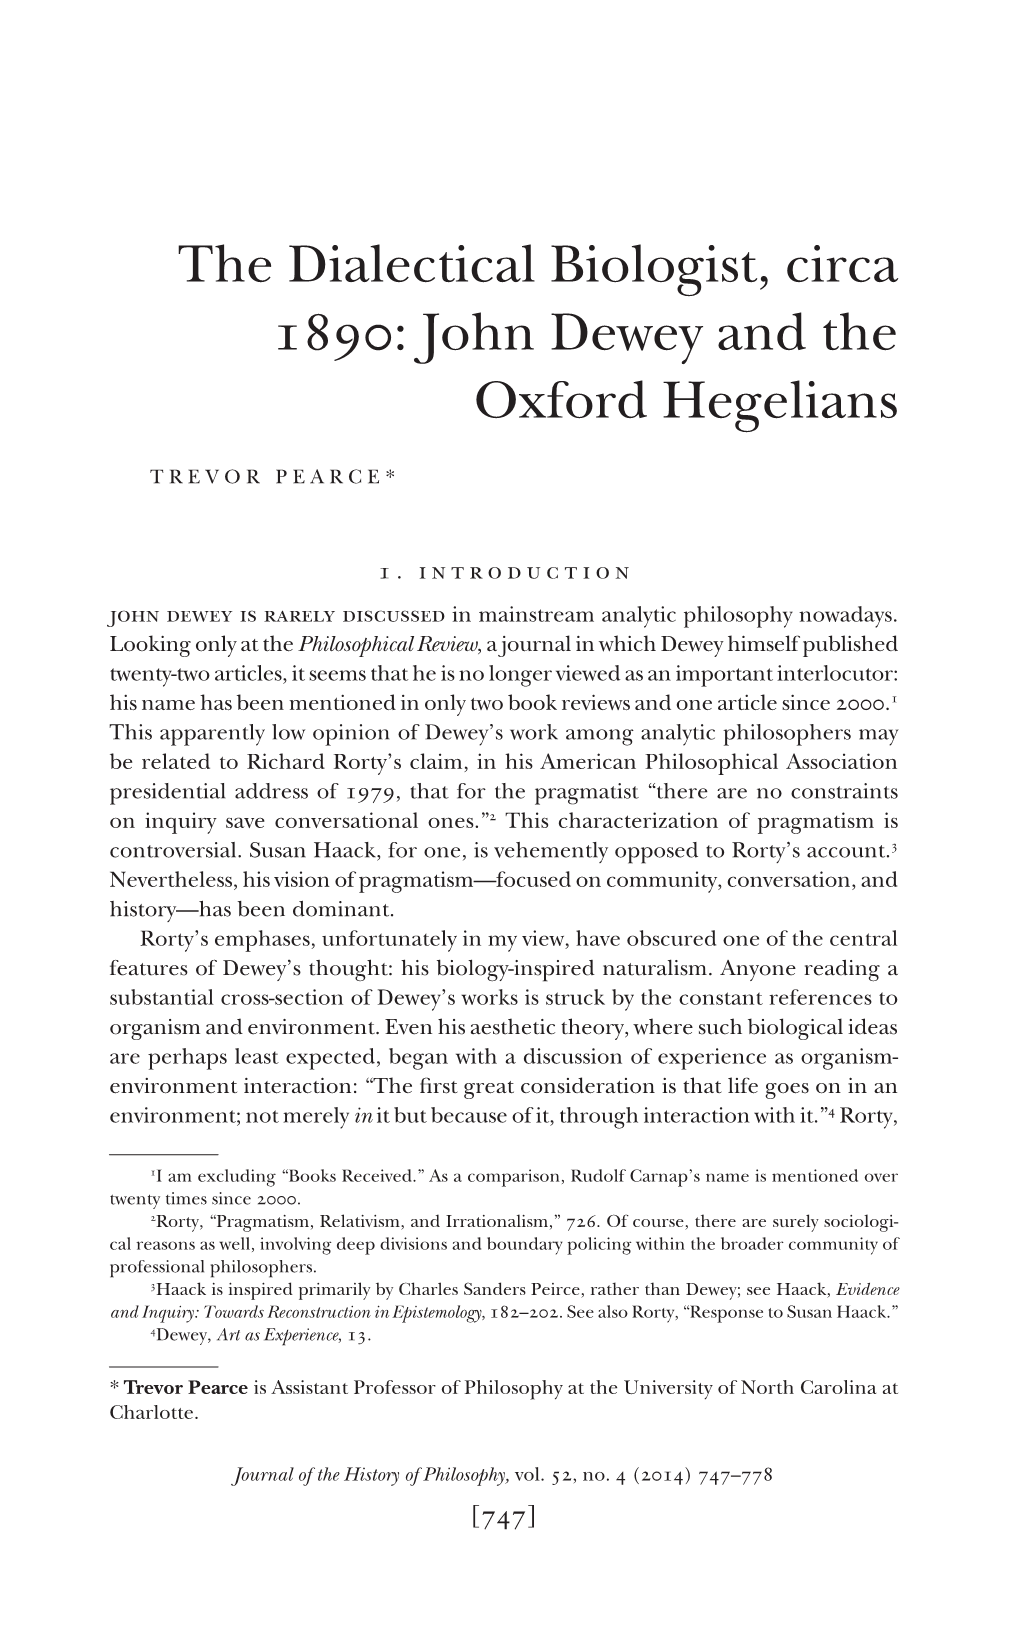 The Dialectical Biologist, Circa 1890: John Dewey and the Oxford Hegelians